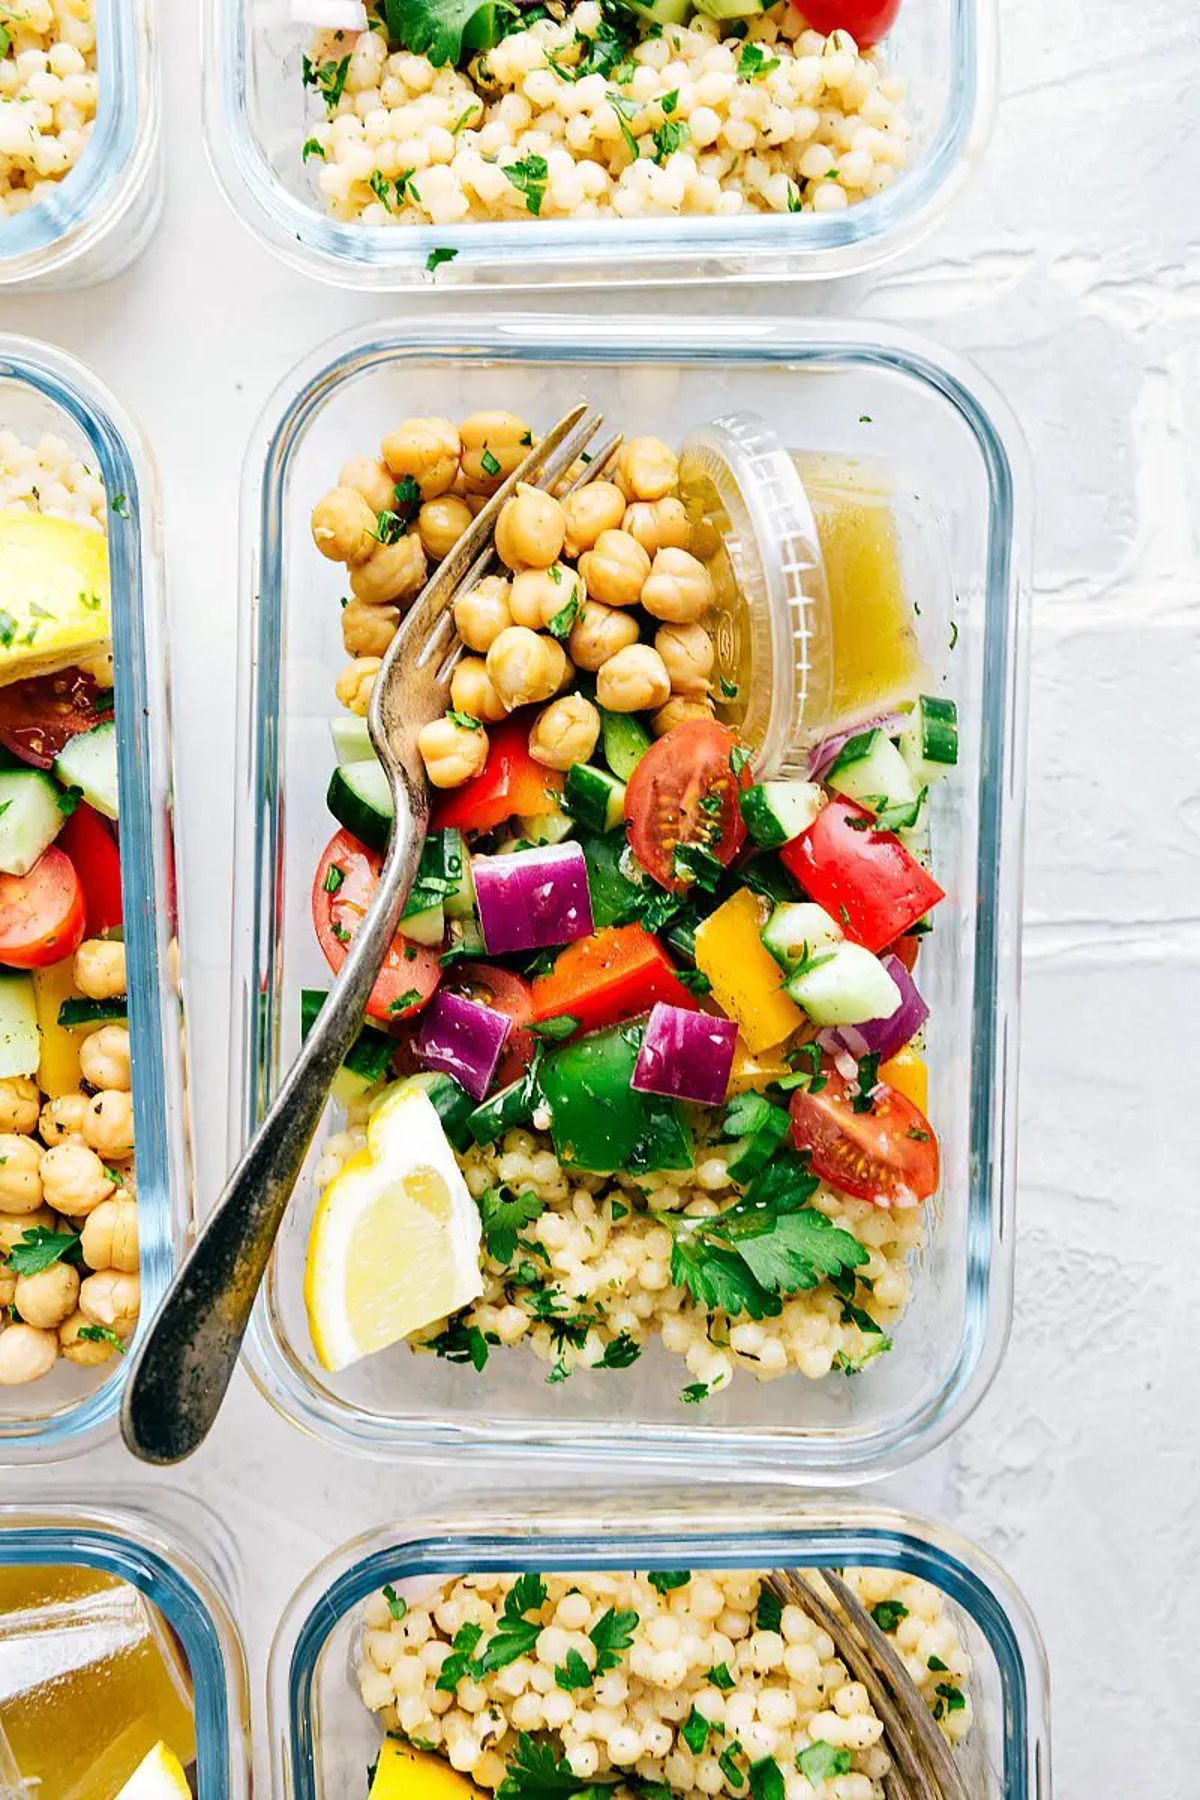 Greek couscous salad in a glass meal prep container.